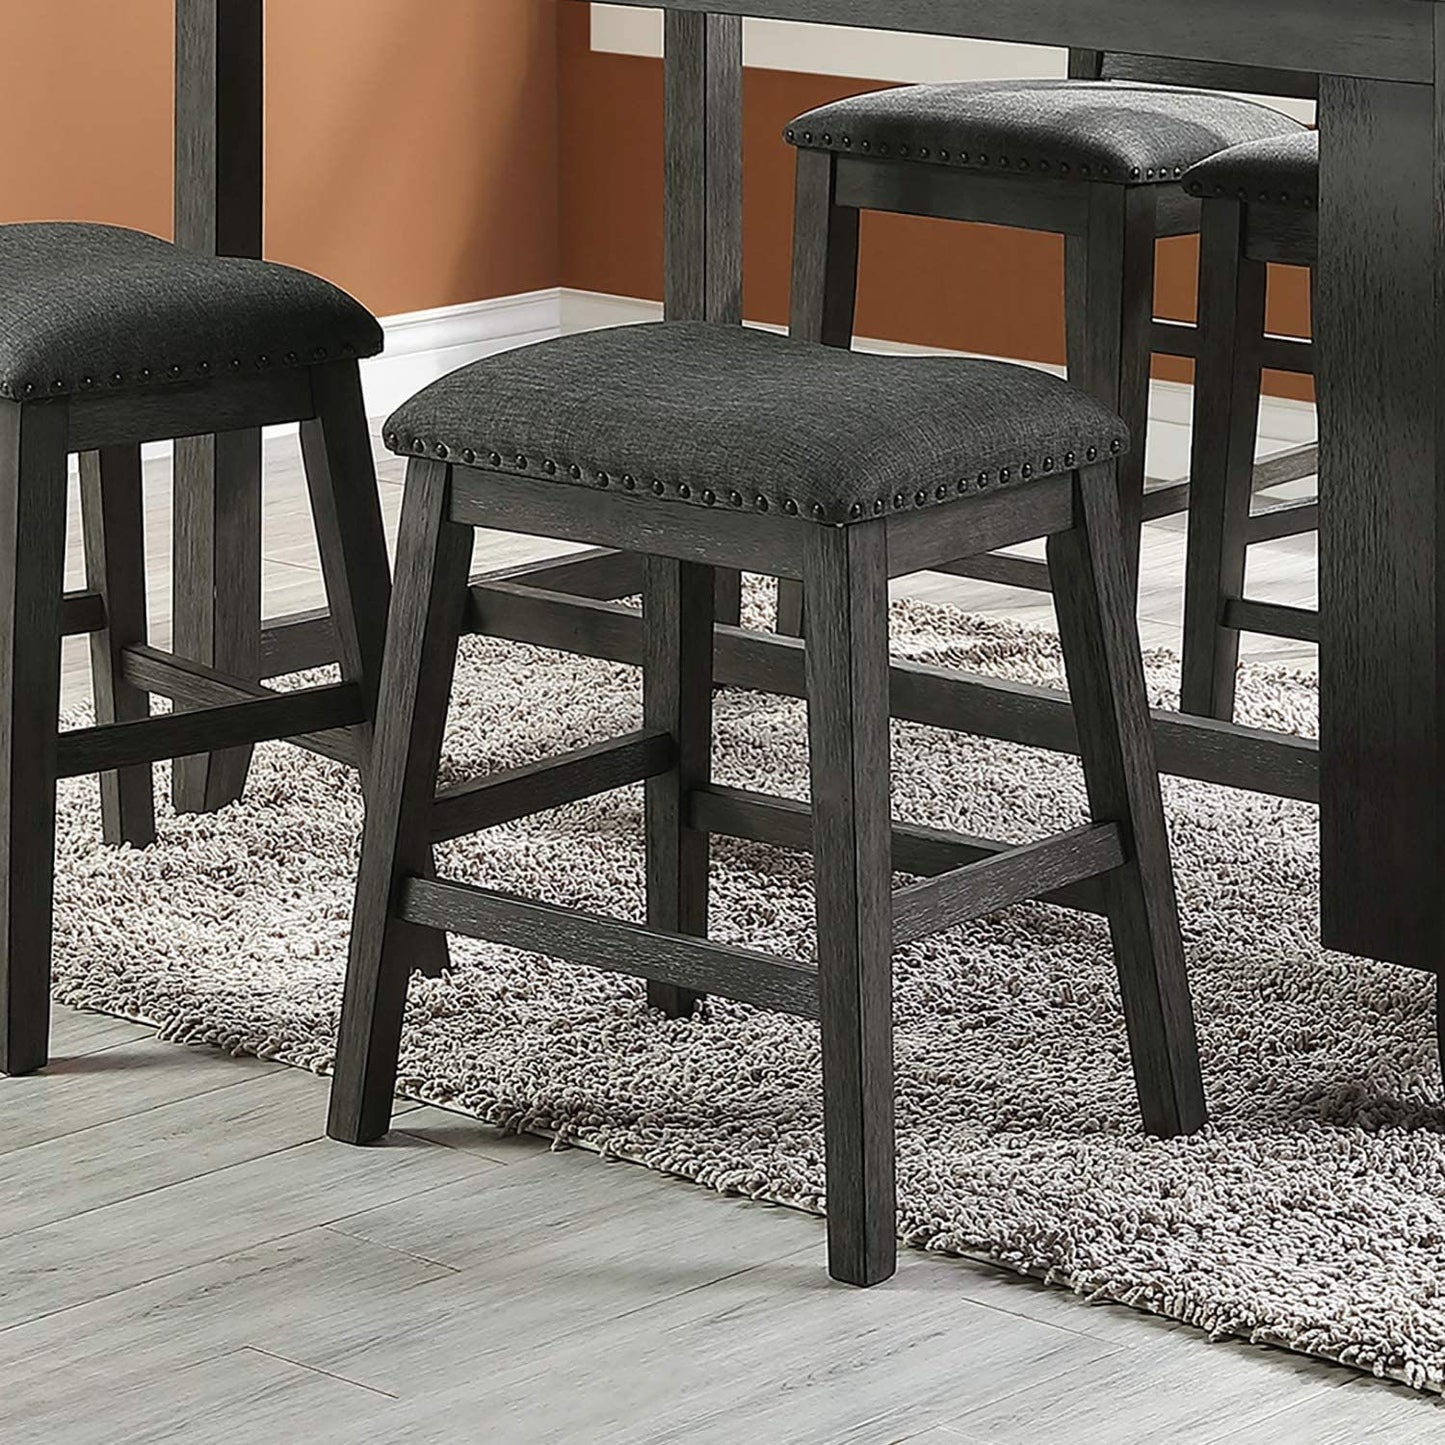 Modern Contemporary Dining Room Furniture Chairs Set of 2 Counter Height High Stools Dark Brown Finish Wooden Foam Cushion Seat